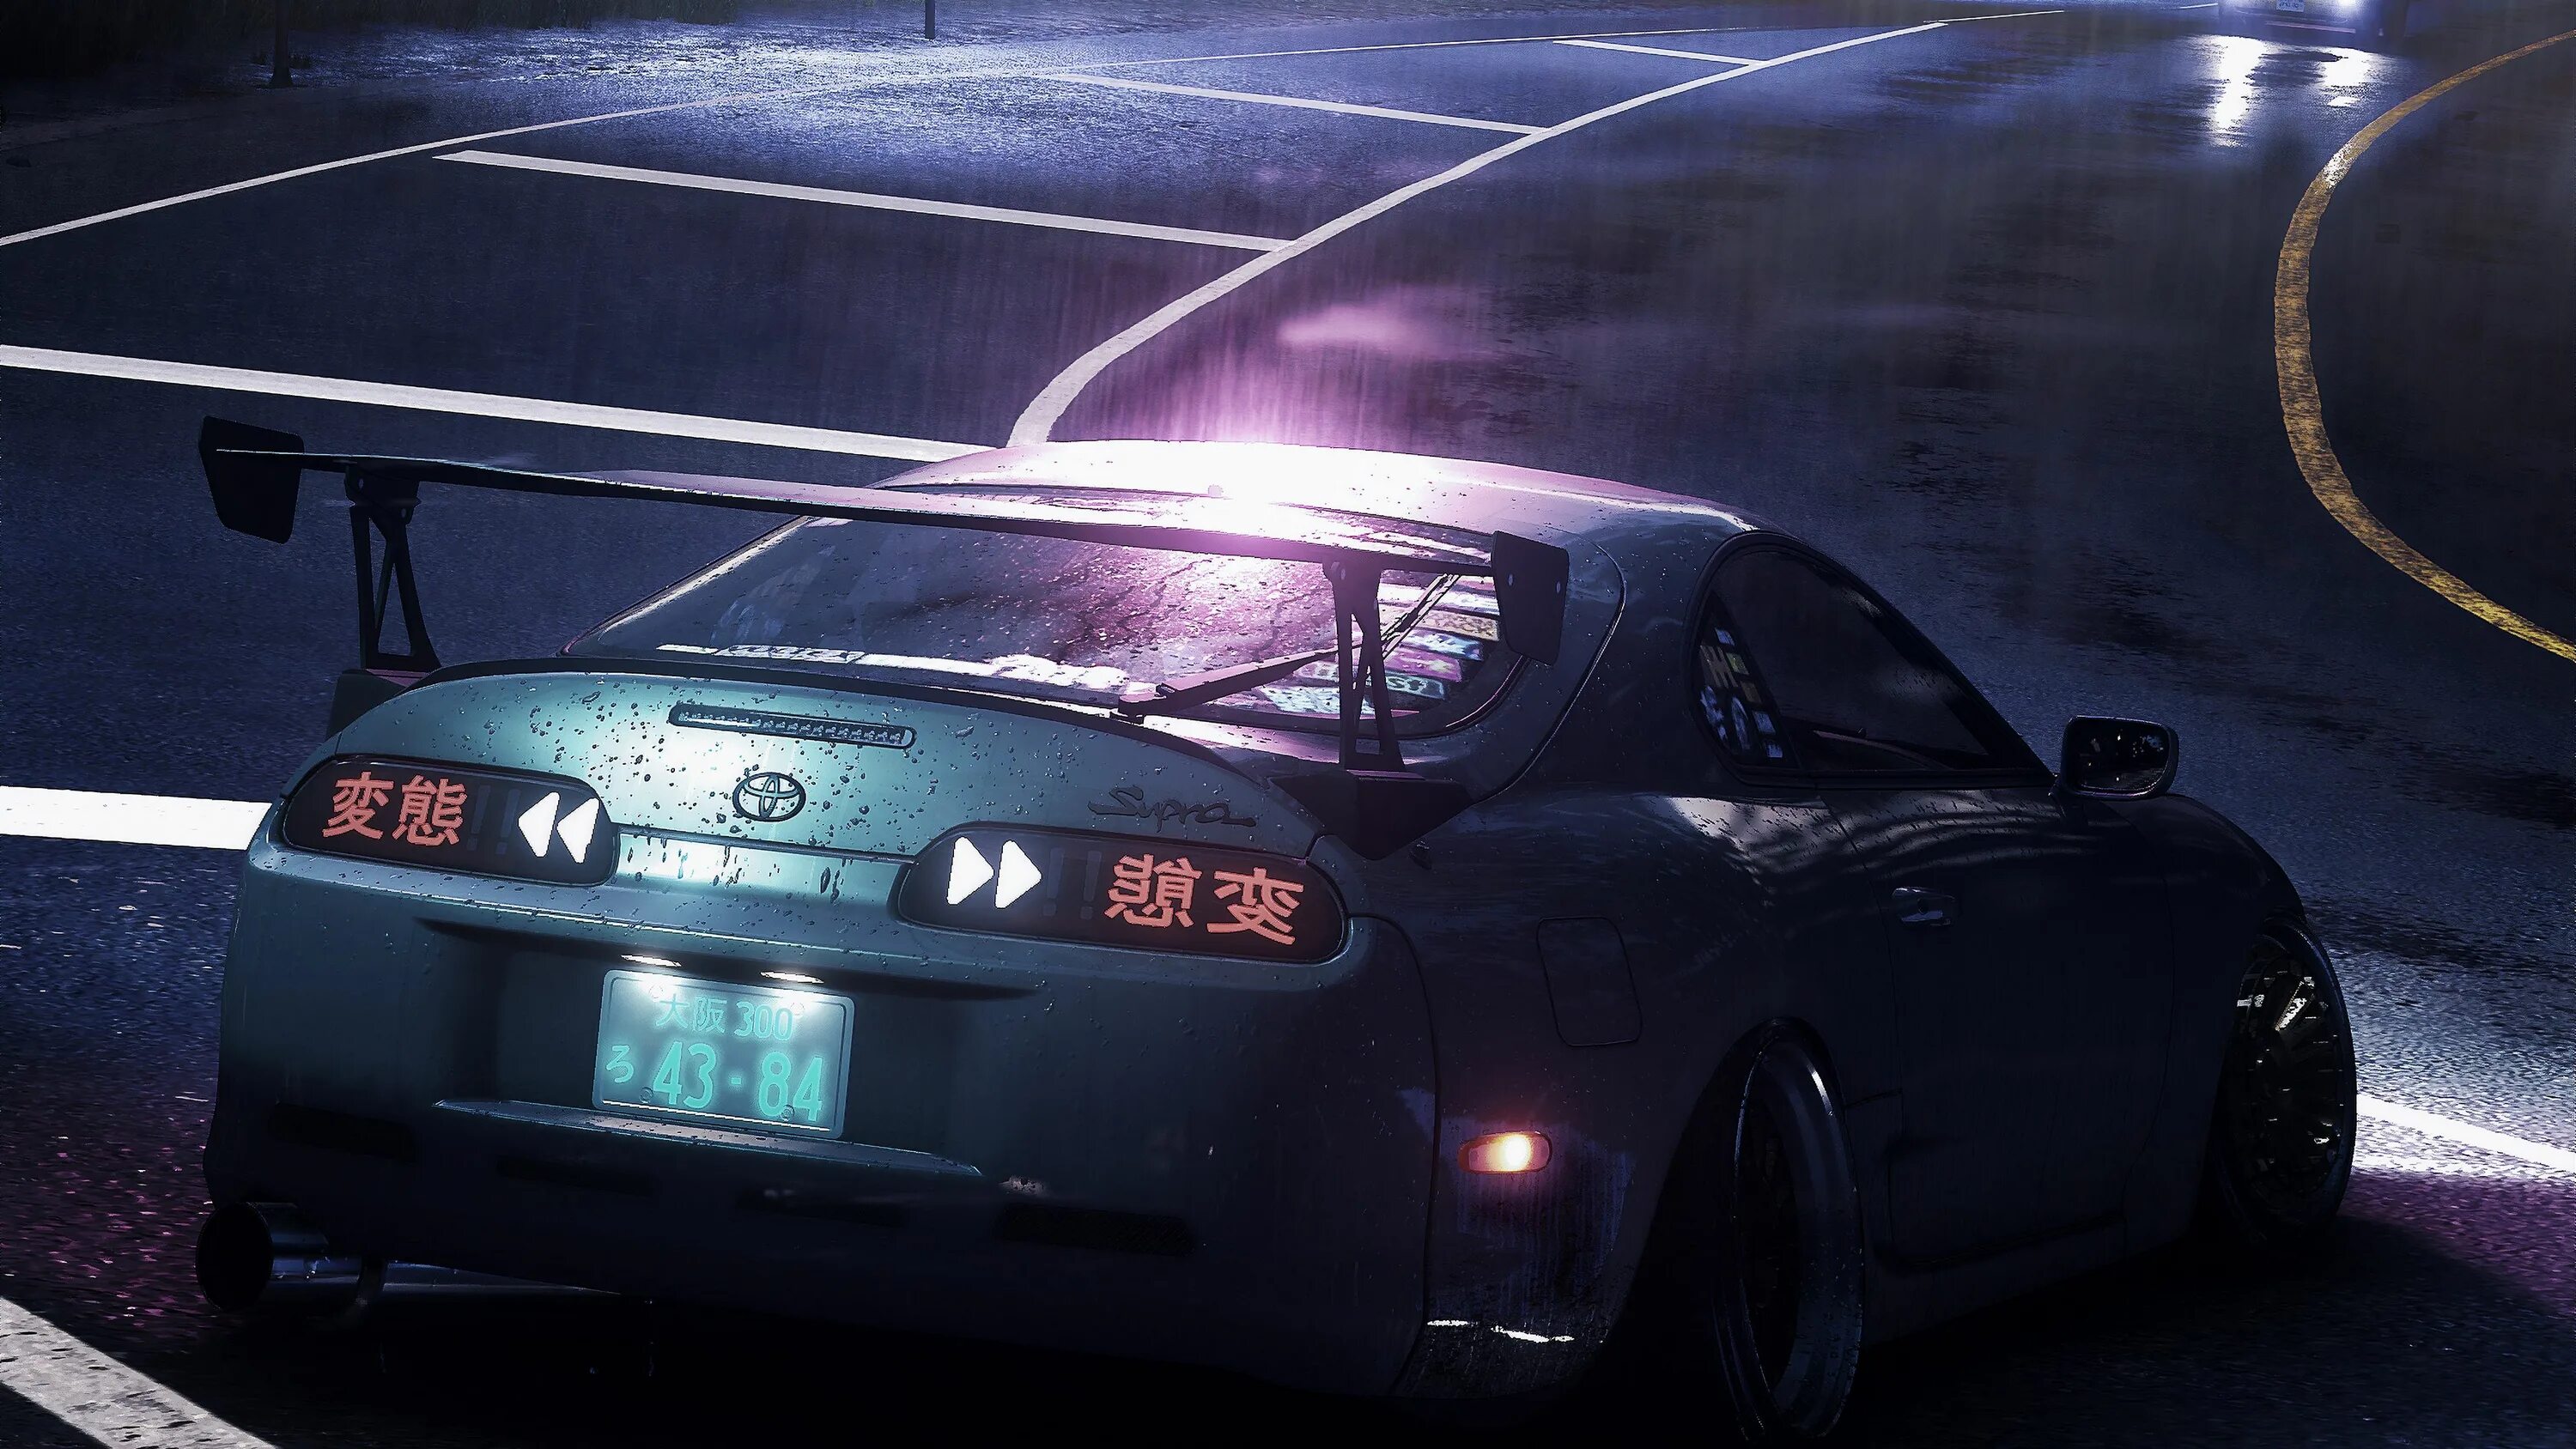 Тойота Супра need for Speed 2015. Тойота Супра нфс 2015. Toyota Supra NFS. Toyota Supra NFS 2015. This is good car